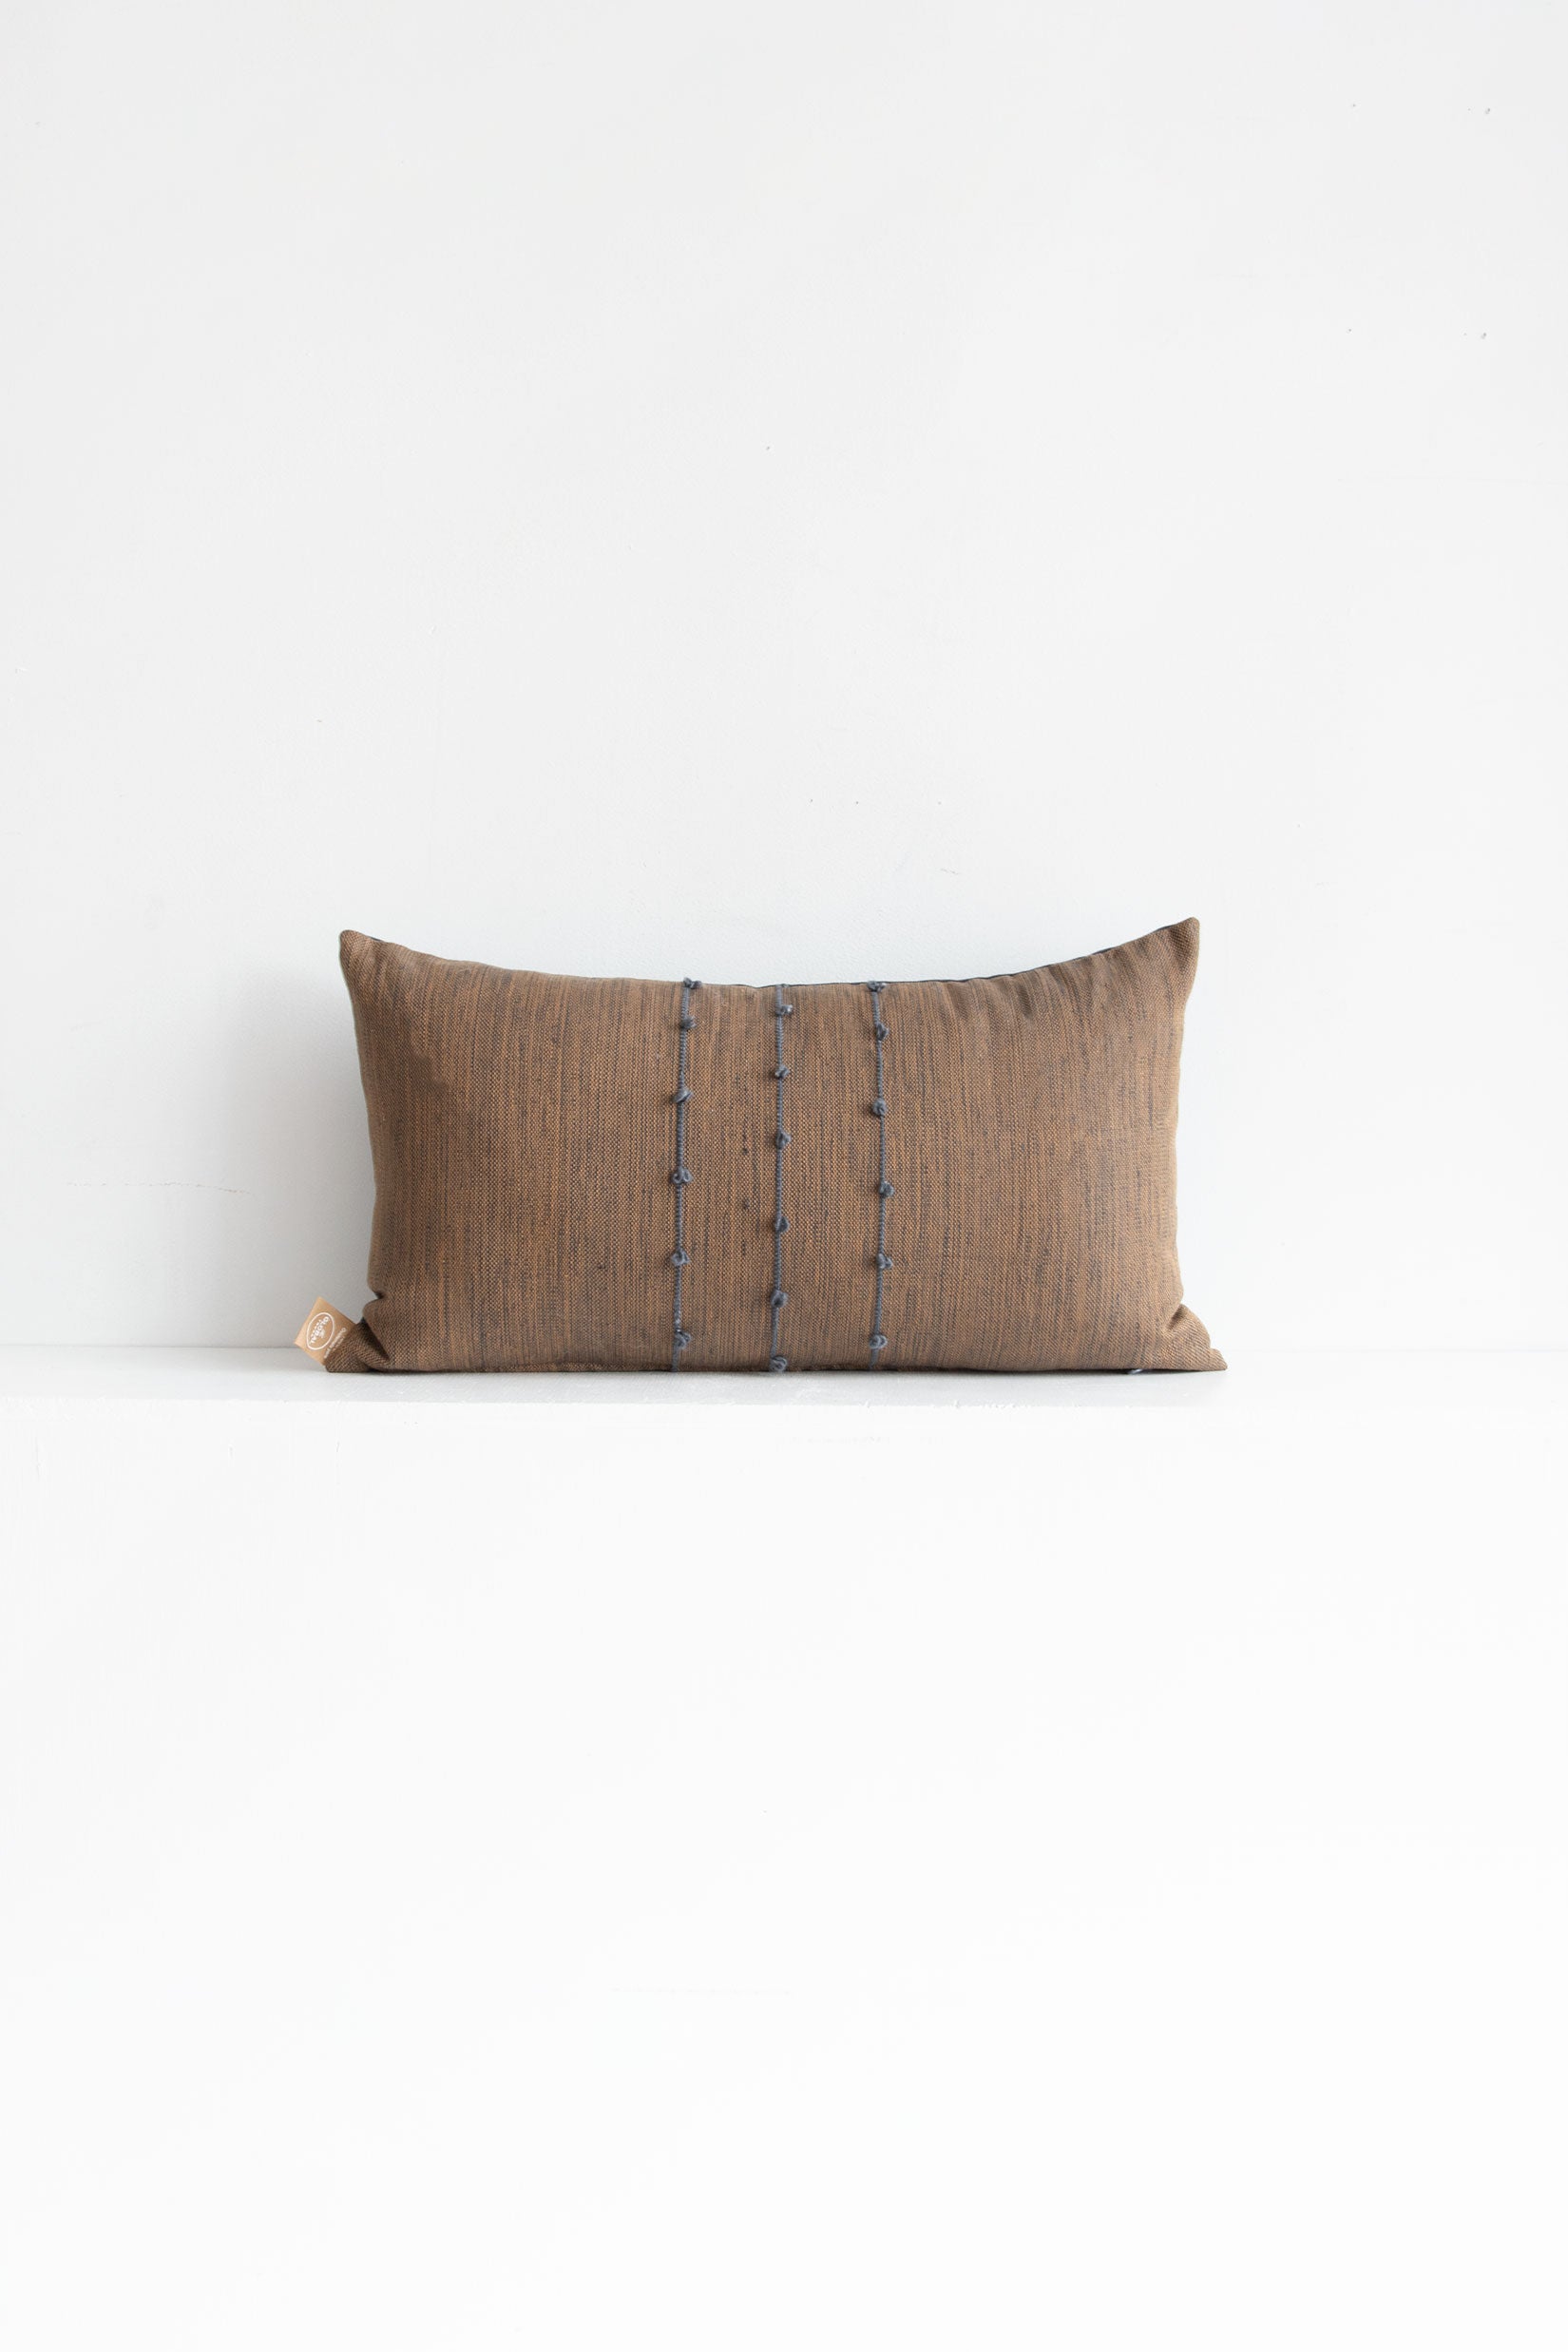 Lumbar brown woven throw pillow with small grey pom poms arranged along three vertical grey lines stretching across the middle of the pillow.